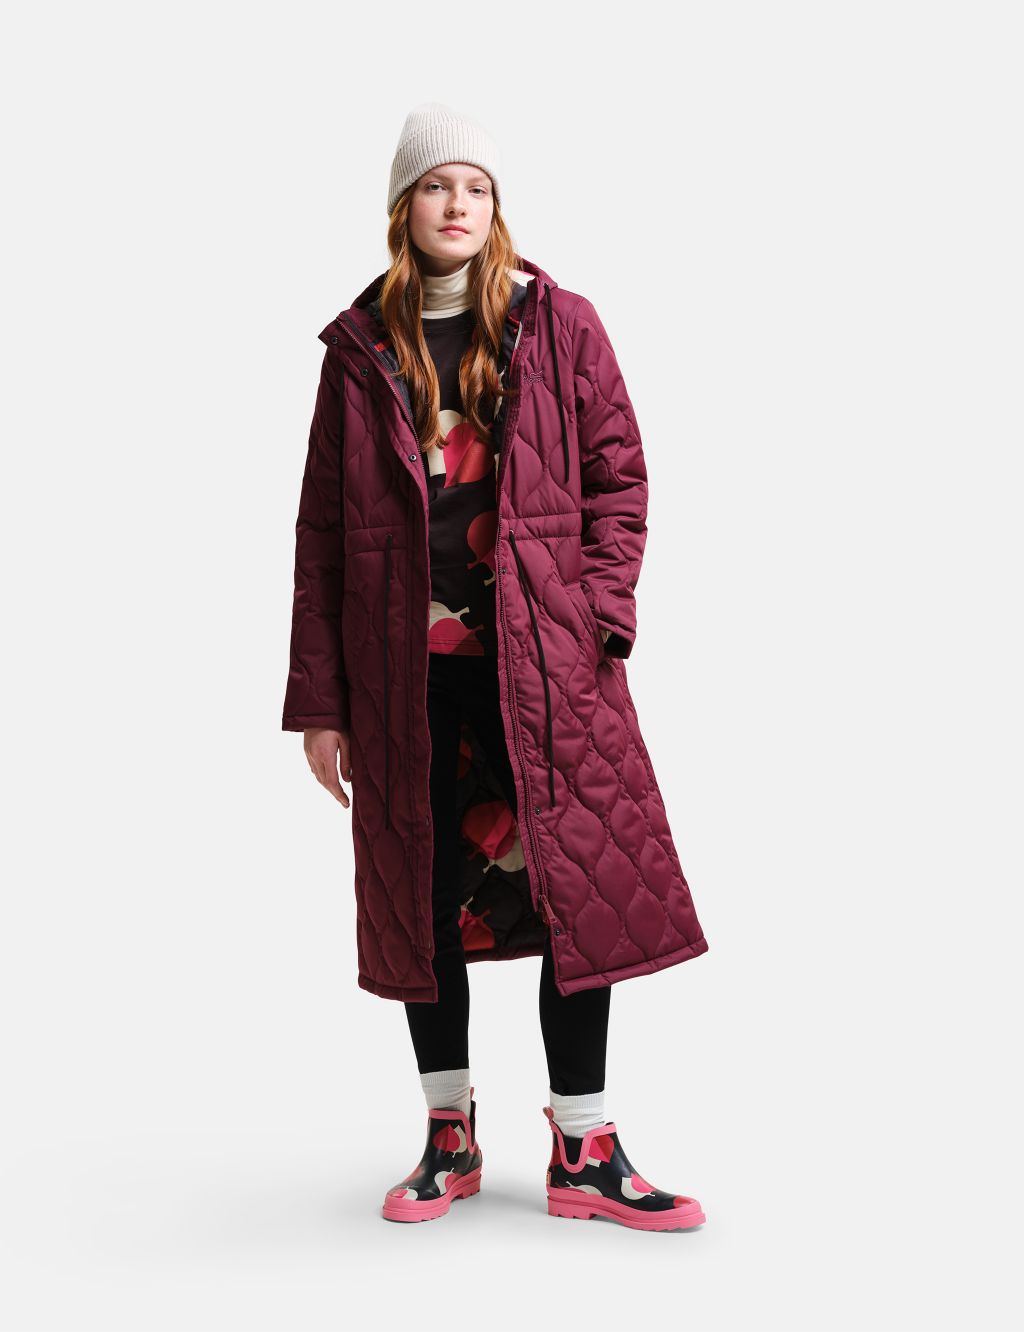 Orla Kiely Quilted Water-Repellent Longline Coat image 1